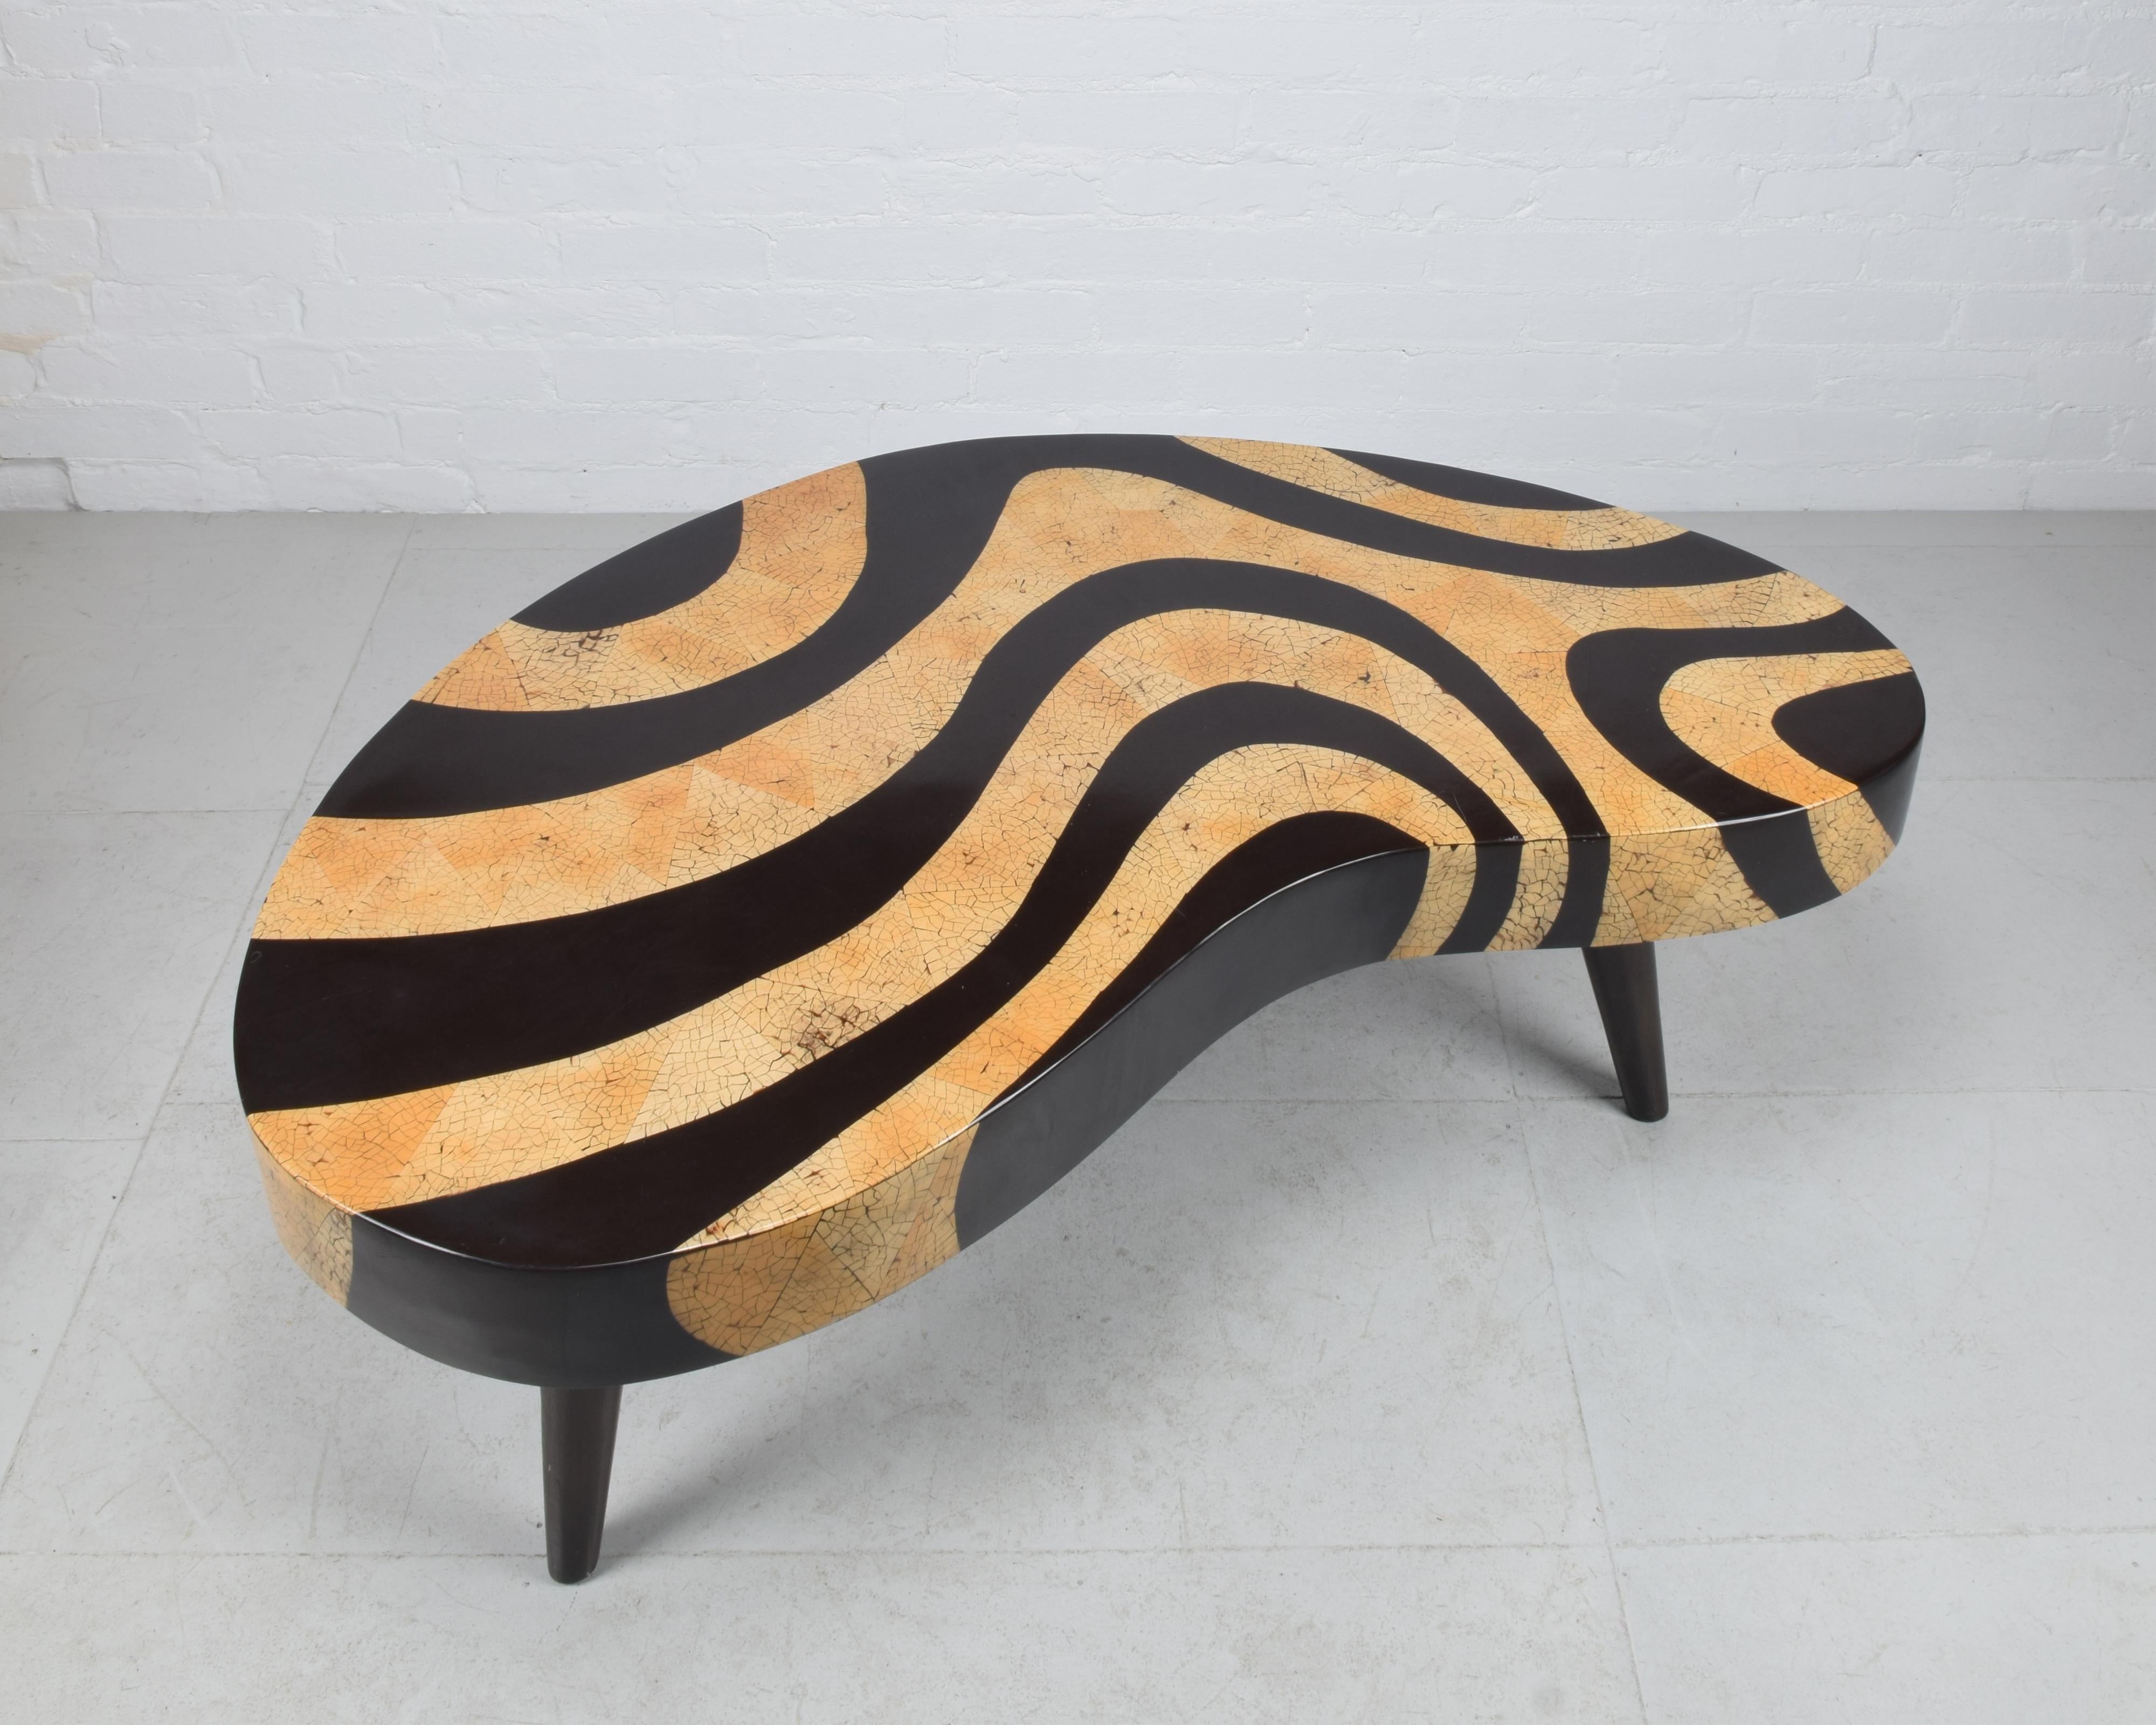 Biomorphic kidney-shaped coffee table with faux eggshell lacquer mosaic pattern For Sale 1